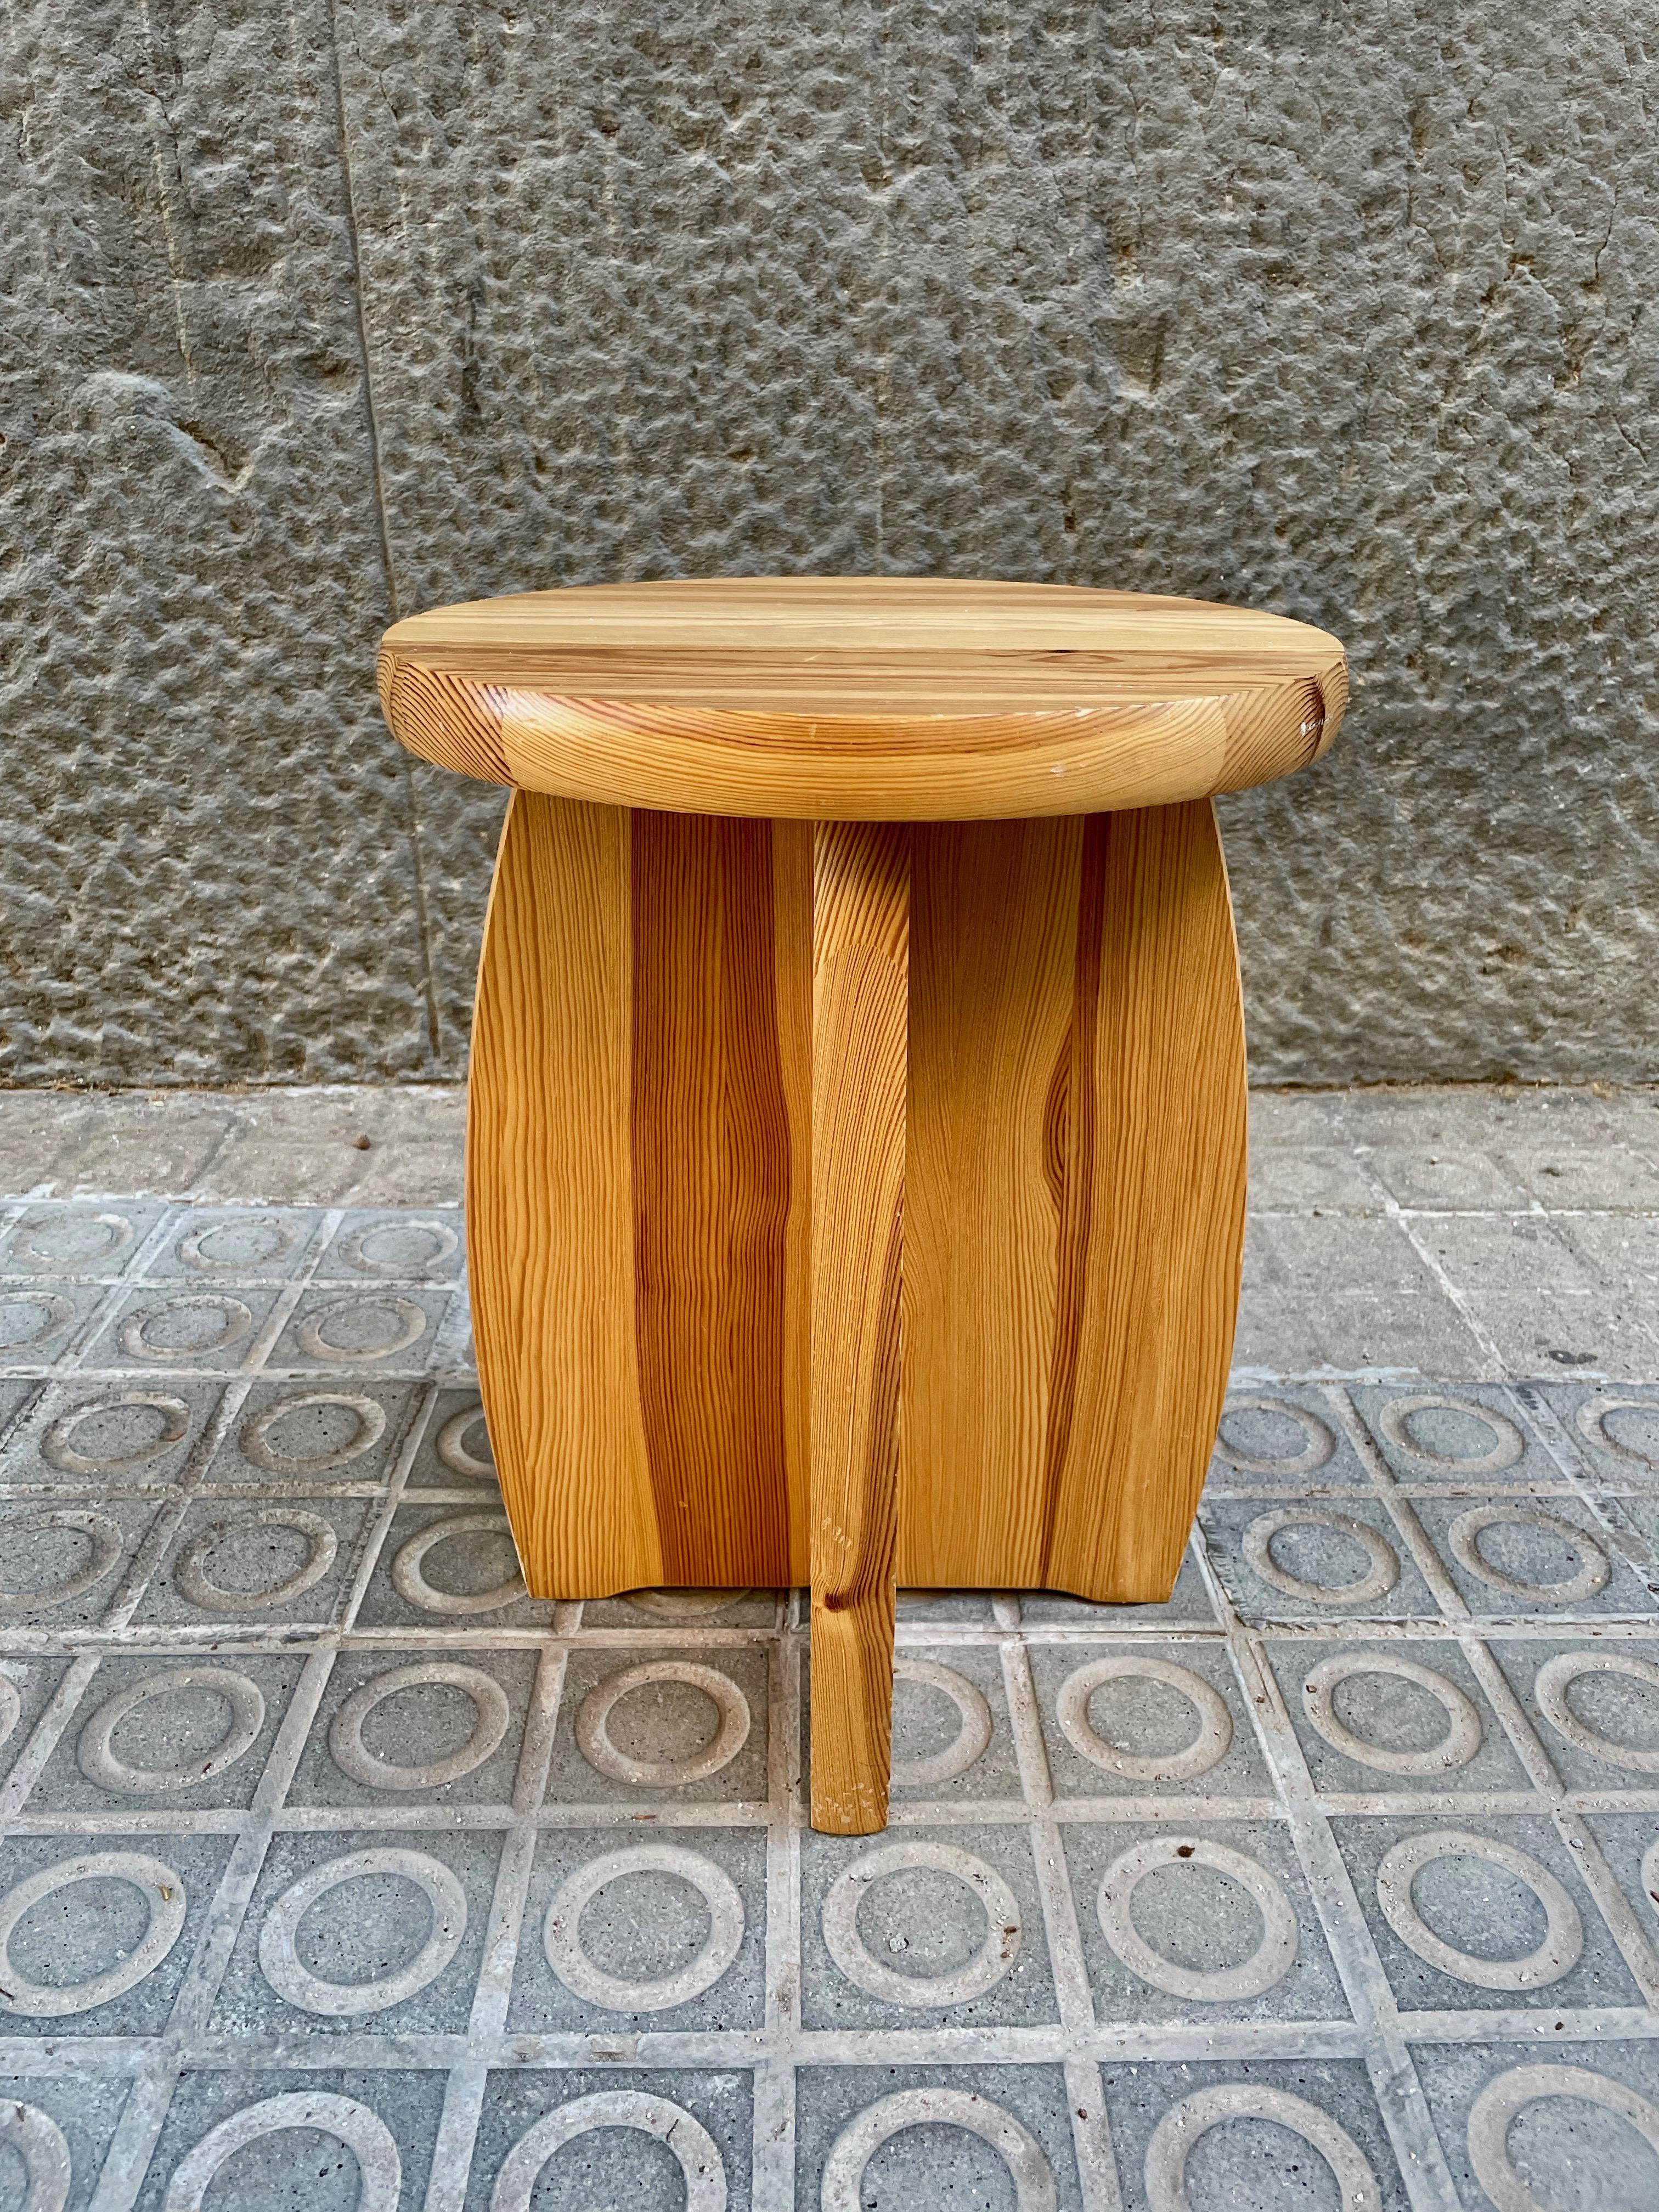 Solid pine stools / side tables manufactured in the 1970s. In the style of Roland Wilhelmsson, Gilbert Marklund, Yngve Ekström, Axel Einar Hjorth etc. Two stools available.